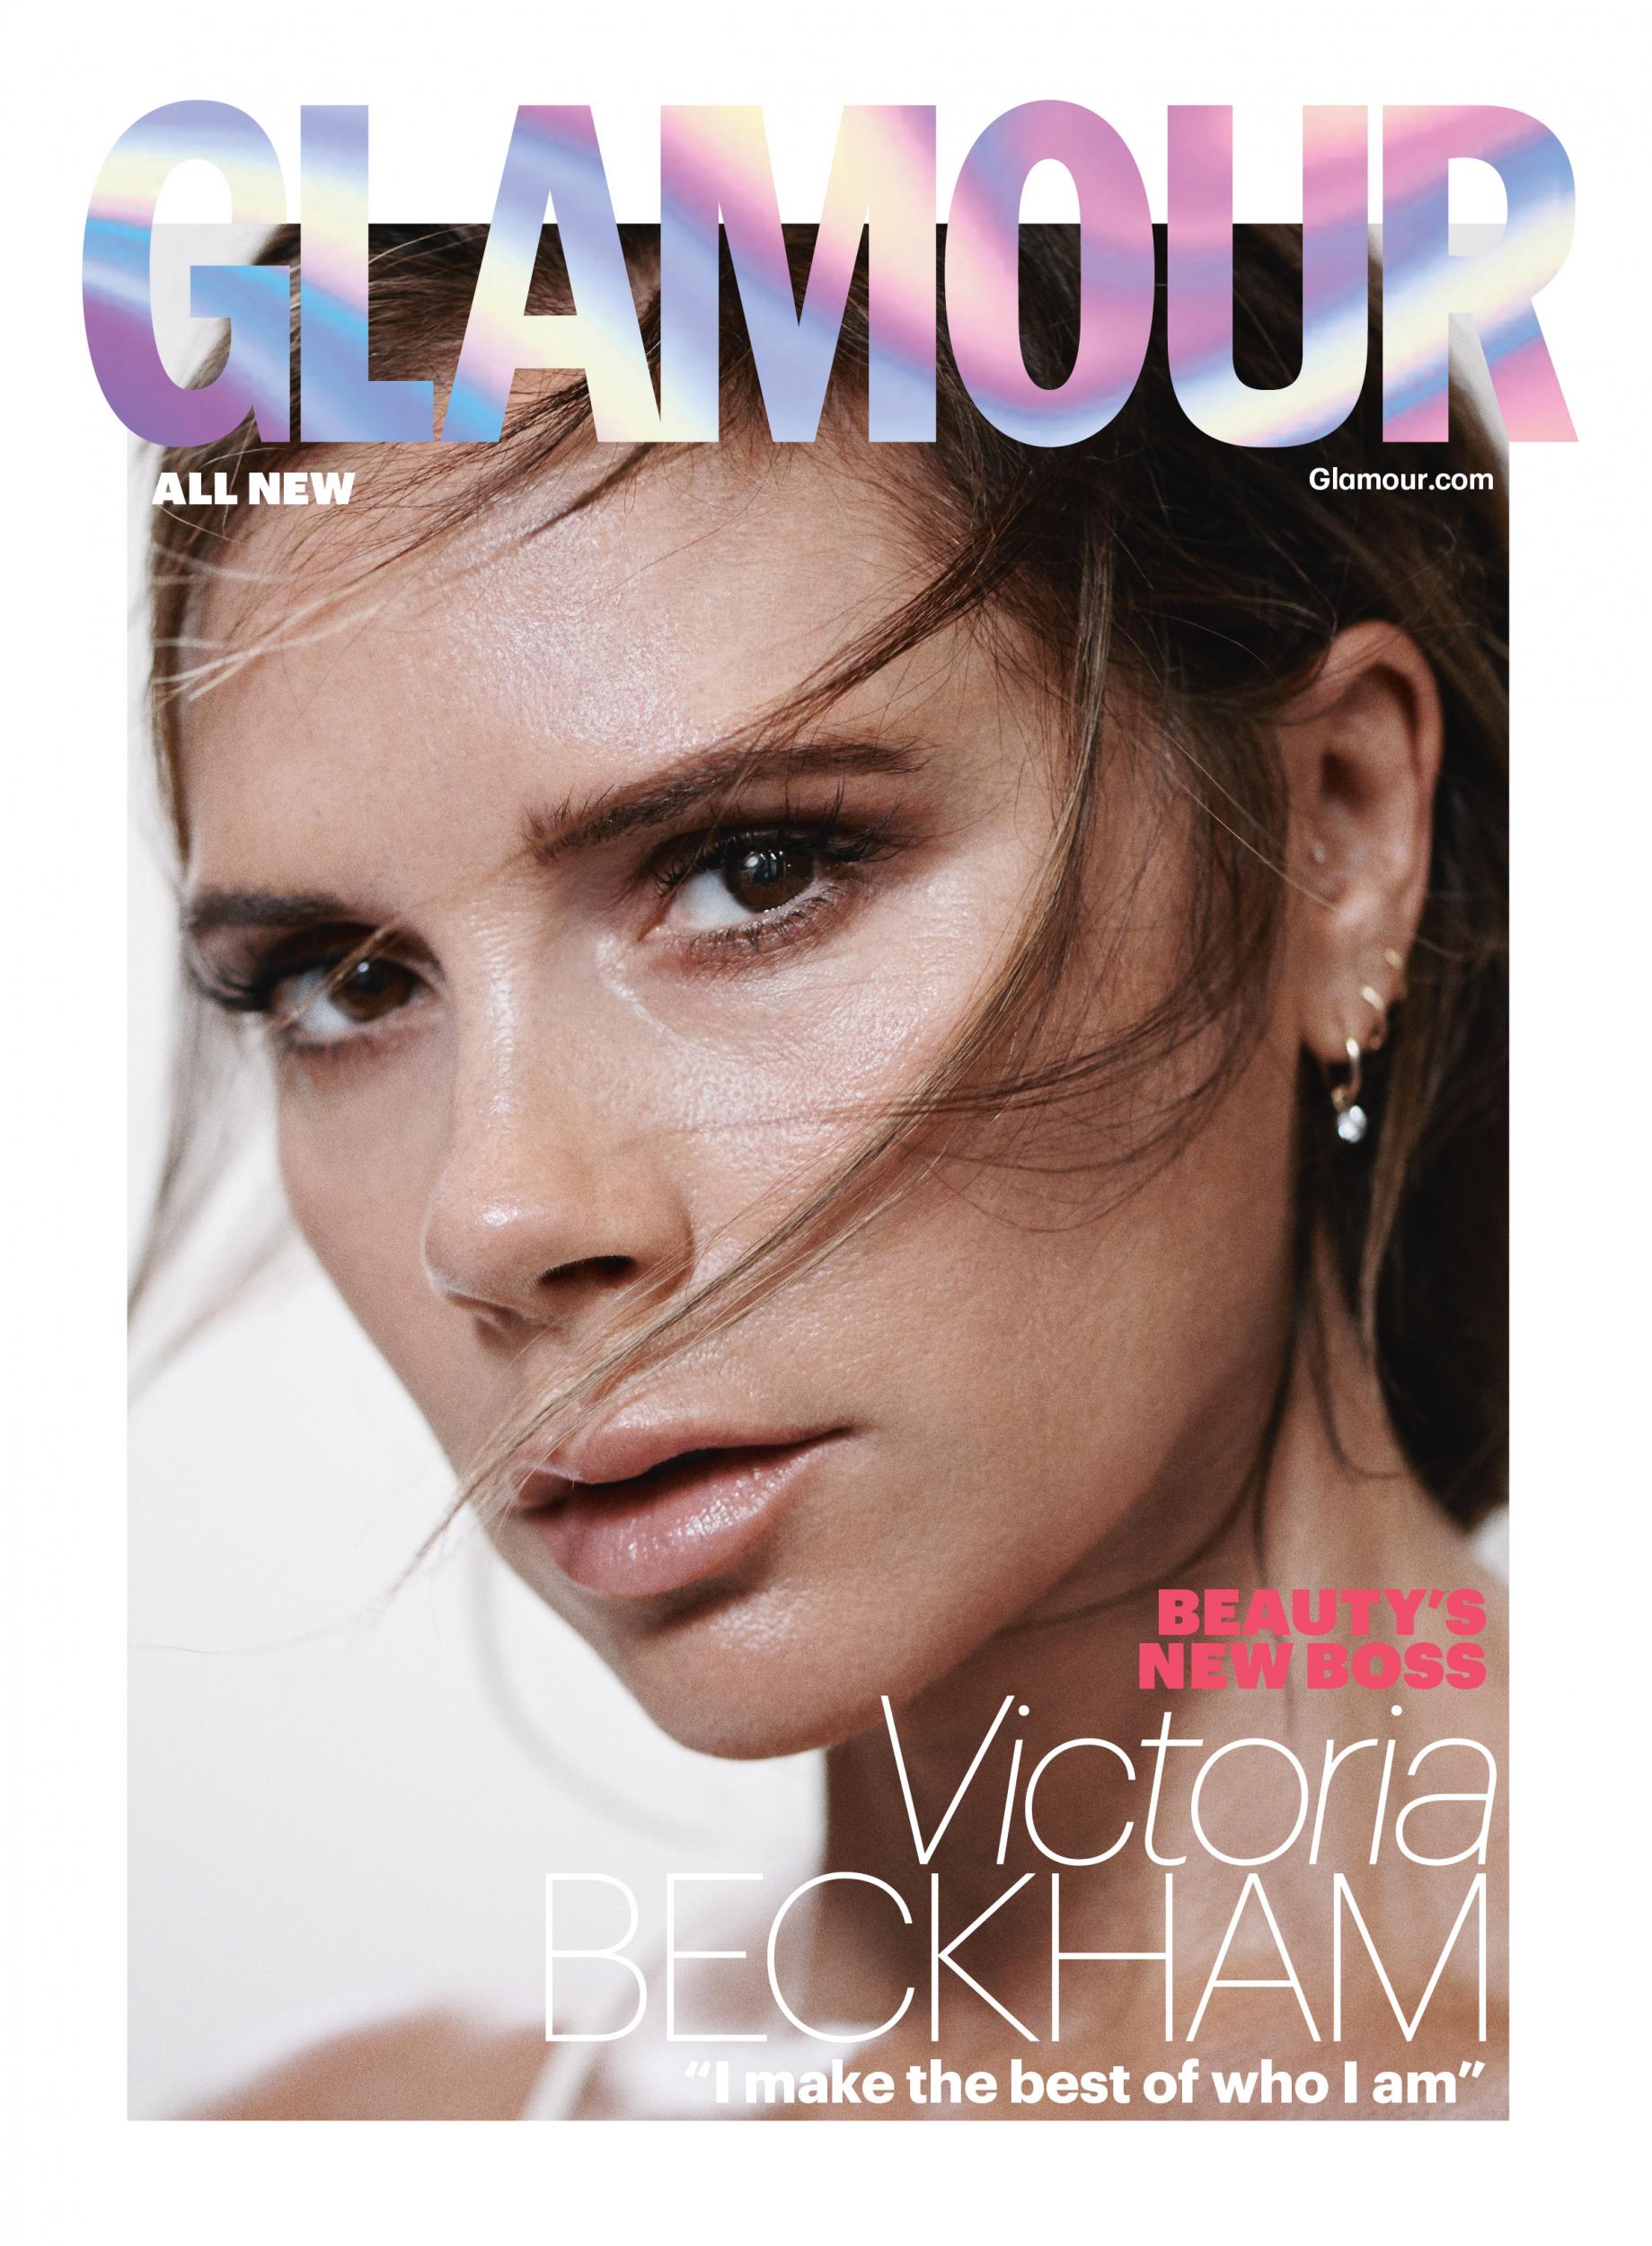 Victoria Beckham on the cover of Glamour UK's autumn/winter 2019 issue